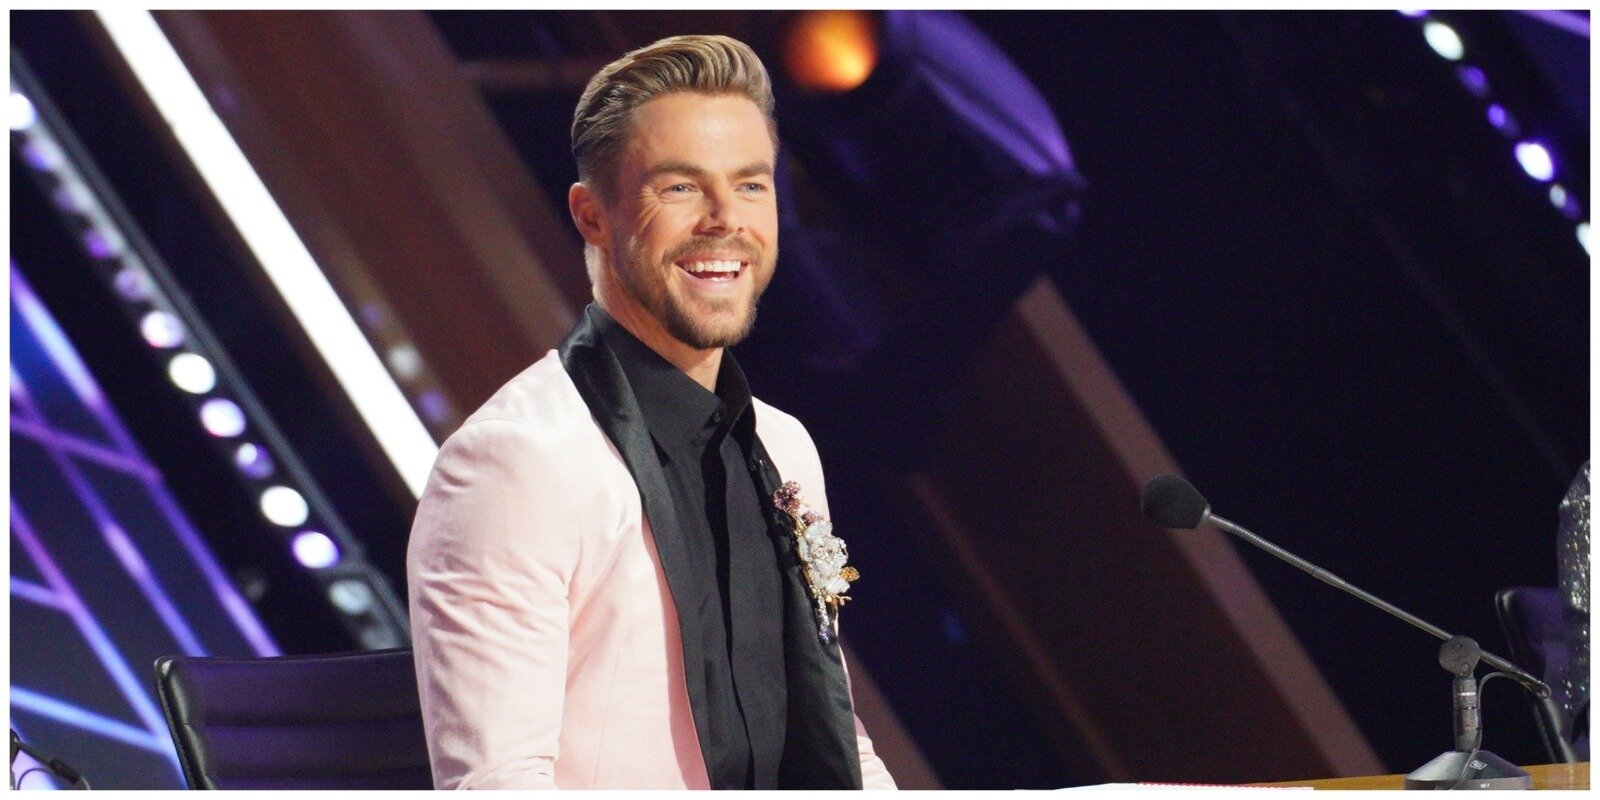 Derek Hough sits behind the judge's table during 'Dancing with the Stars' season 30.